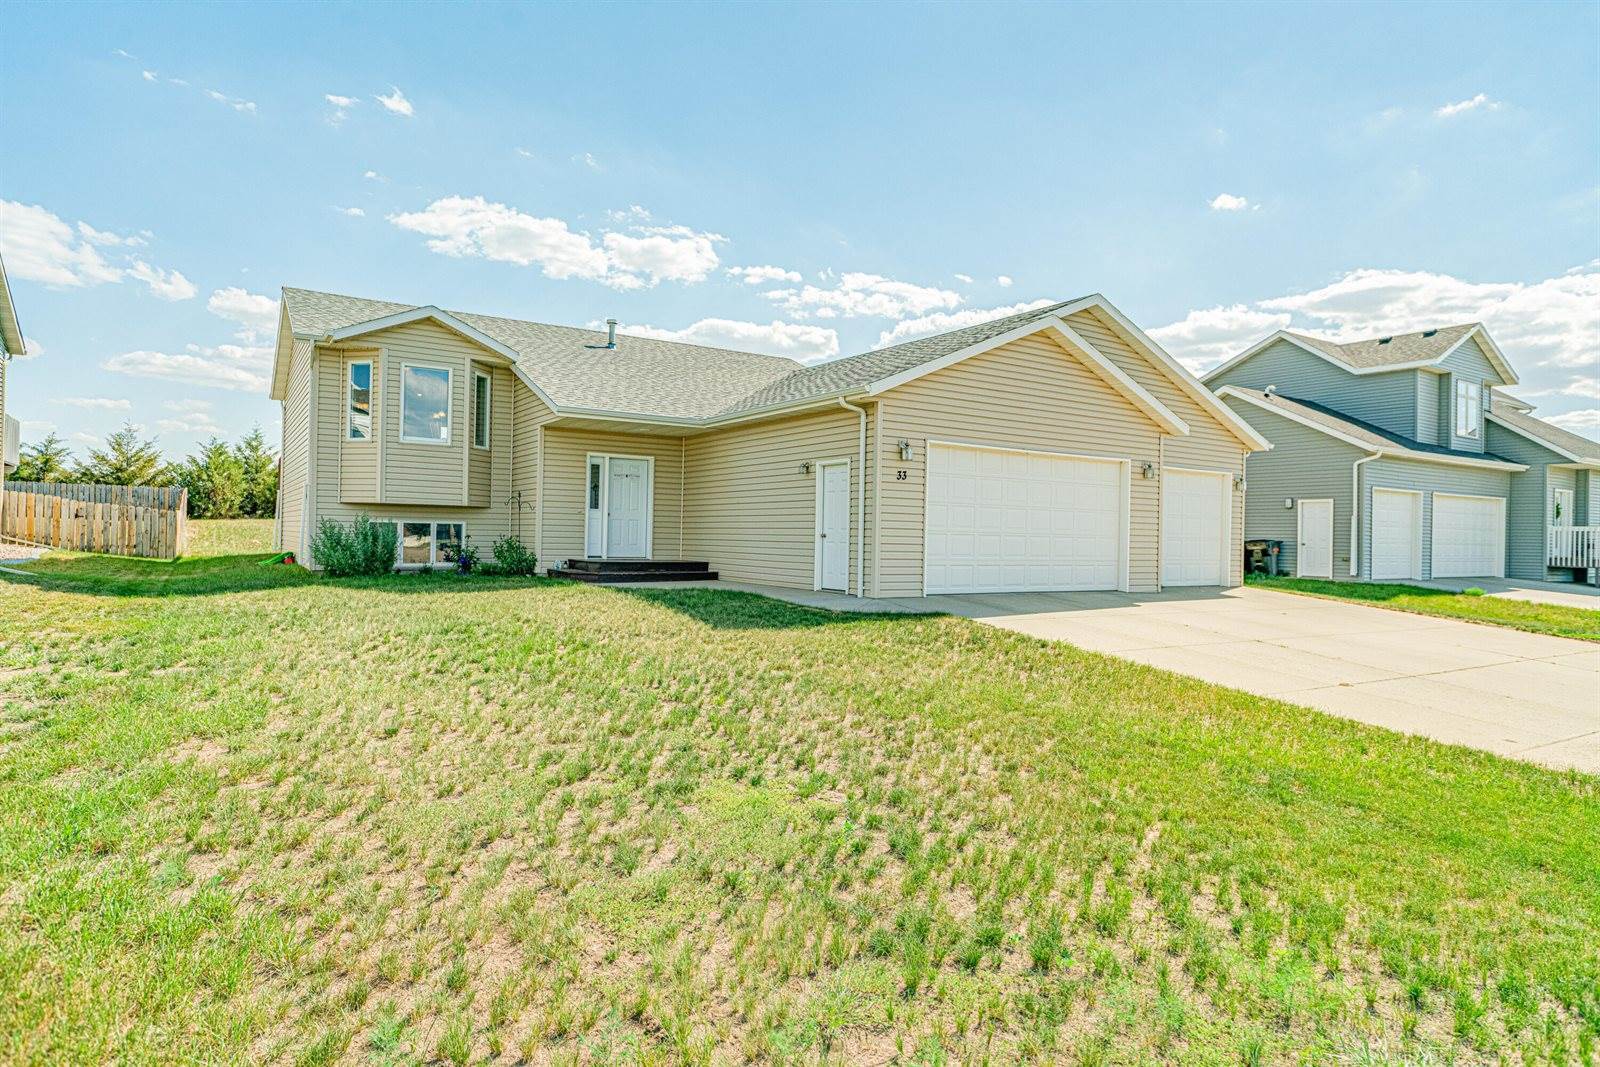 33 Mcginnis Way, Lincoln, ND 58504